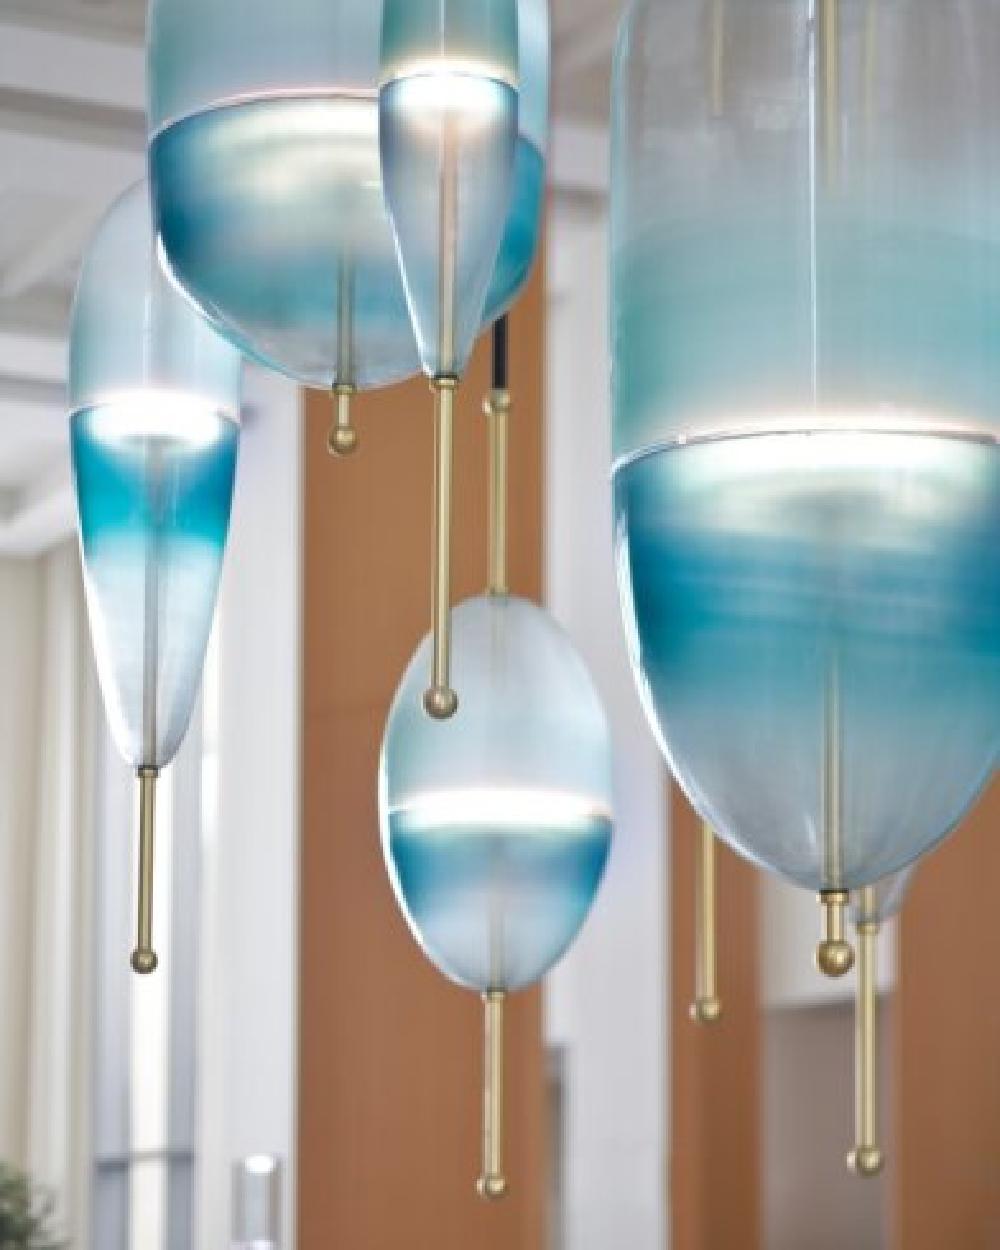 FLOW[T] S2 Pendant lamp in Turquoise by Nao Tamura for Wonderglass For Sale 2